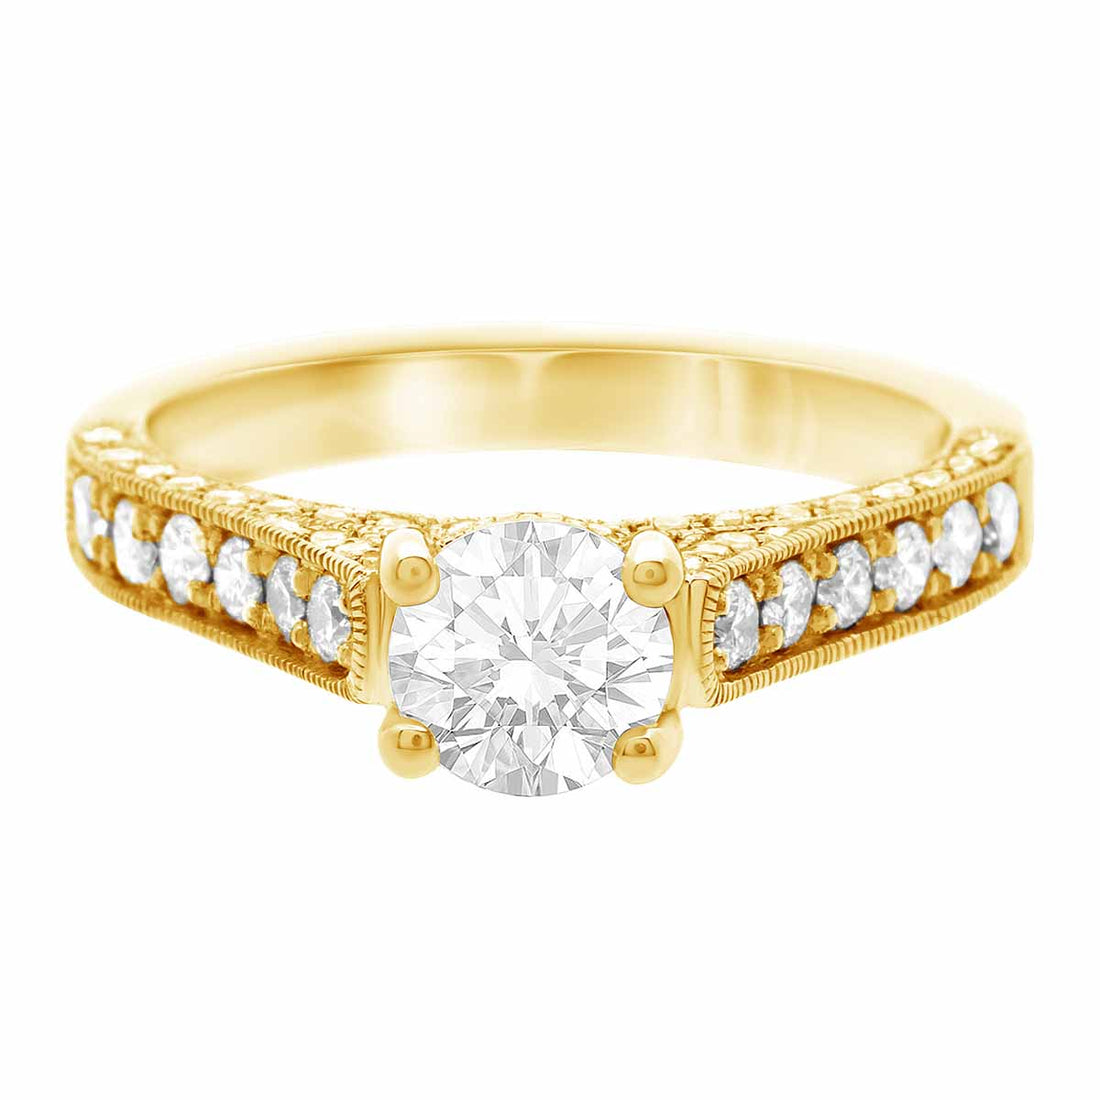 Diamond Encrusted Engagement Ring made in yellow gold